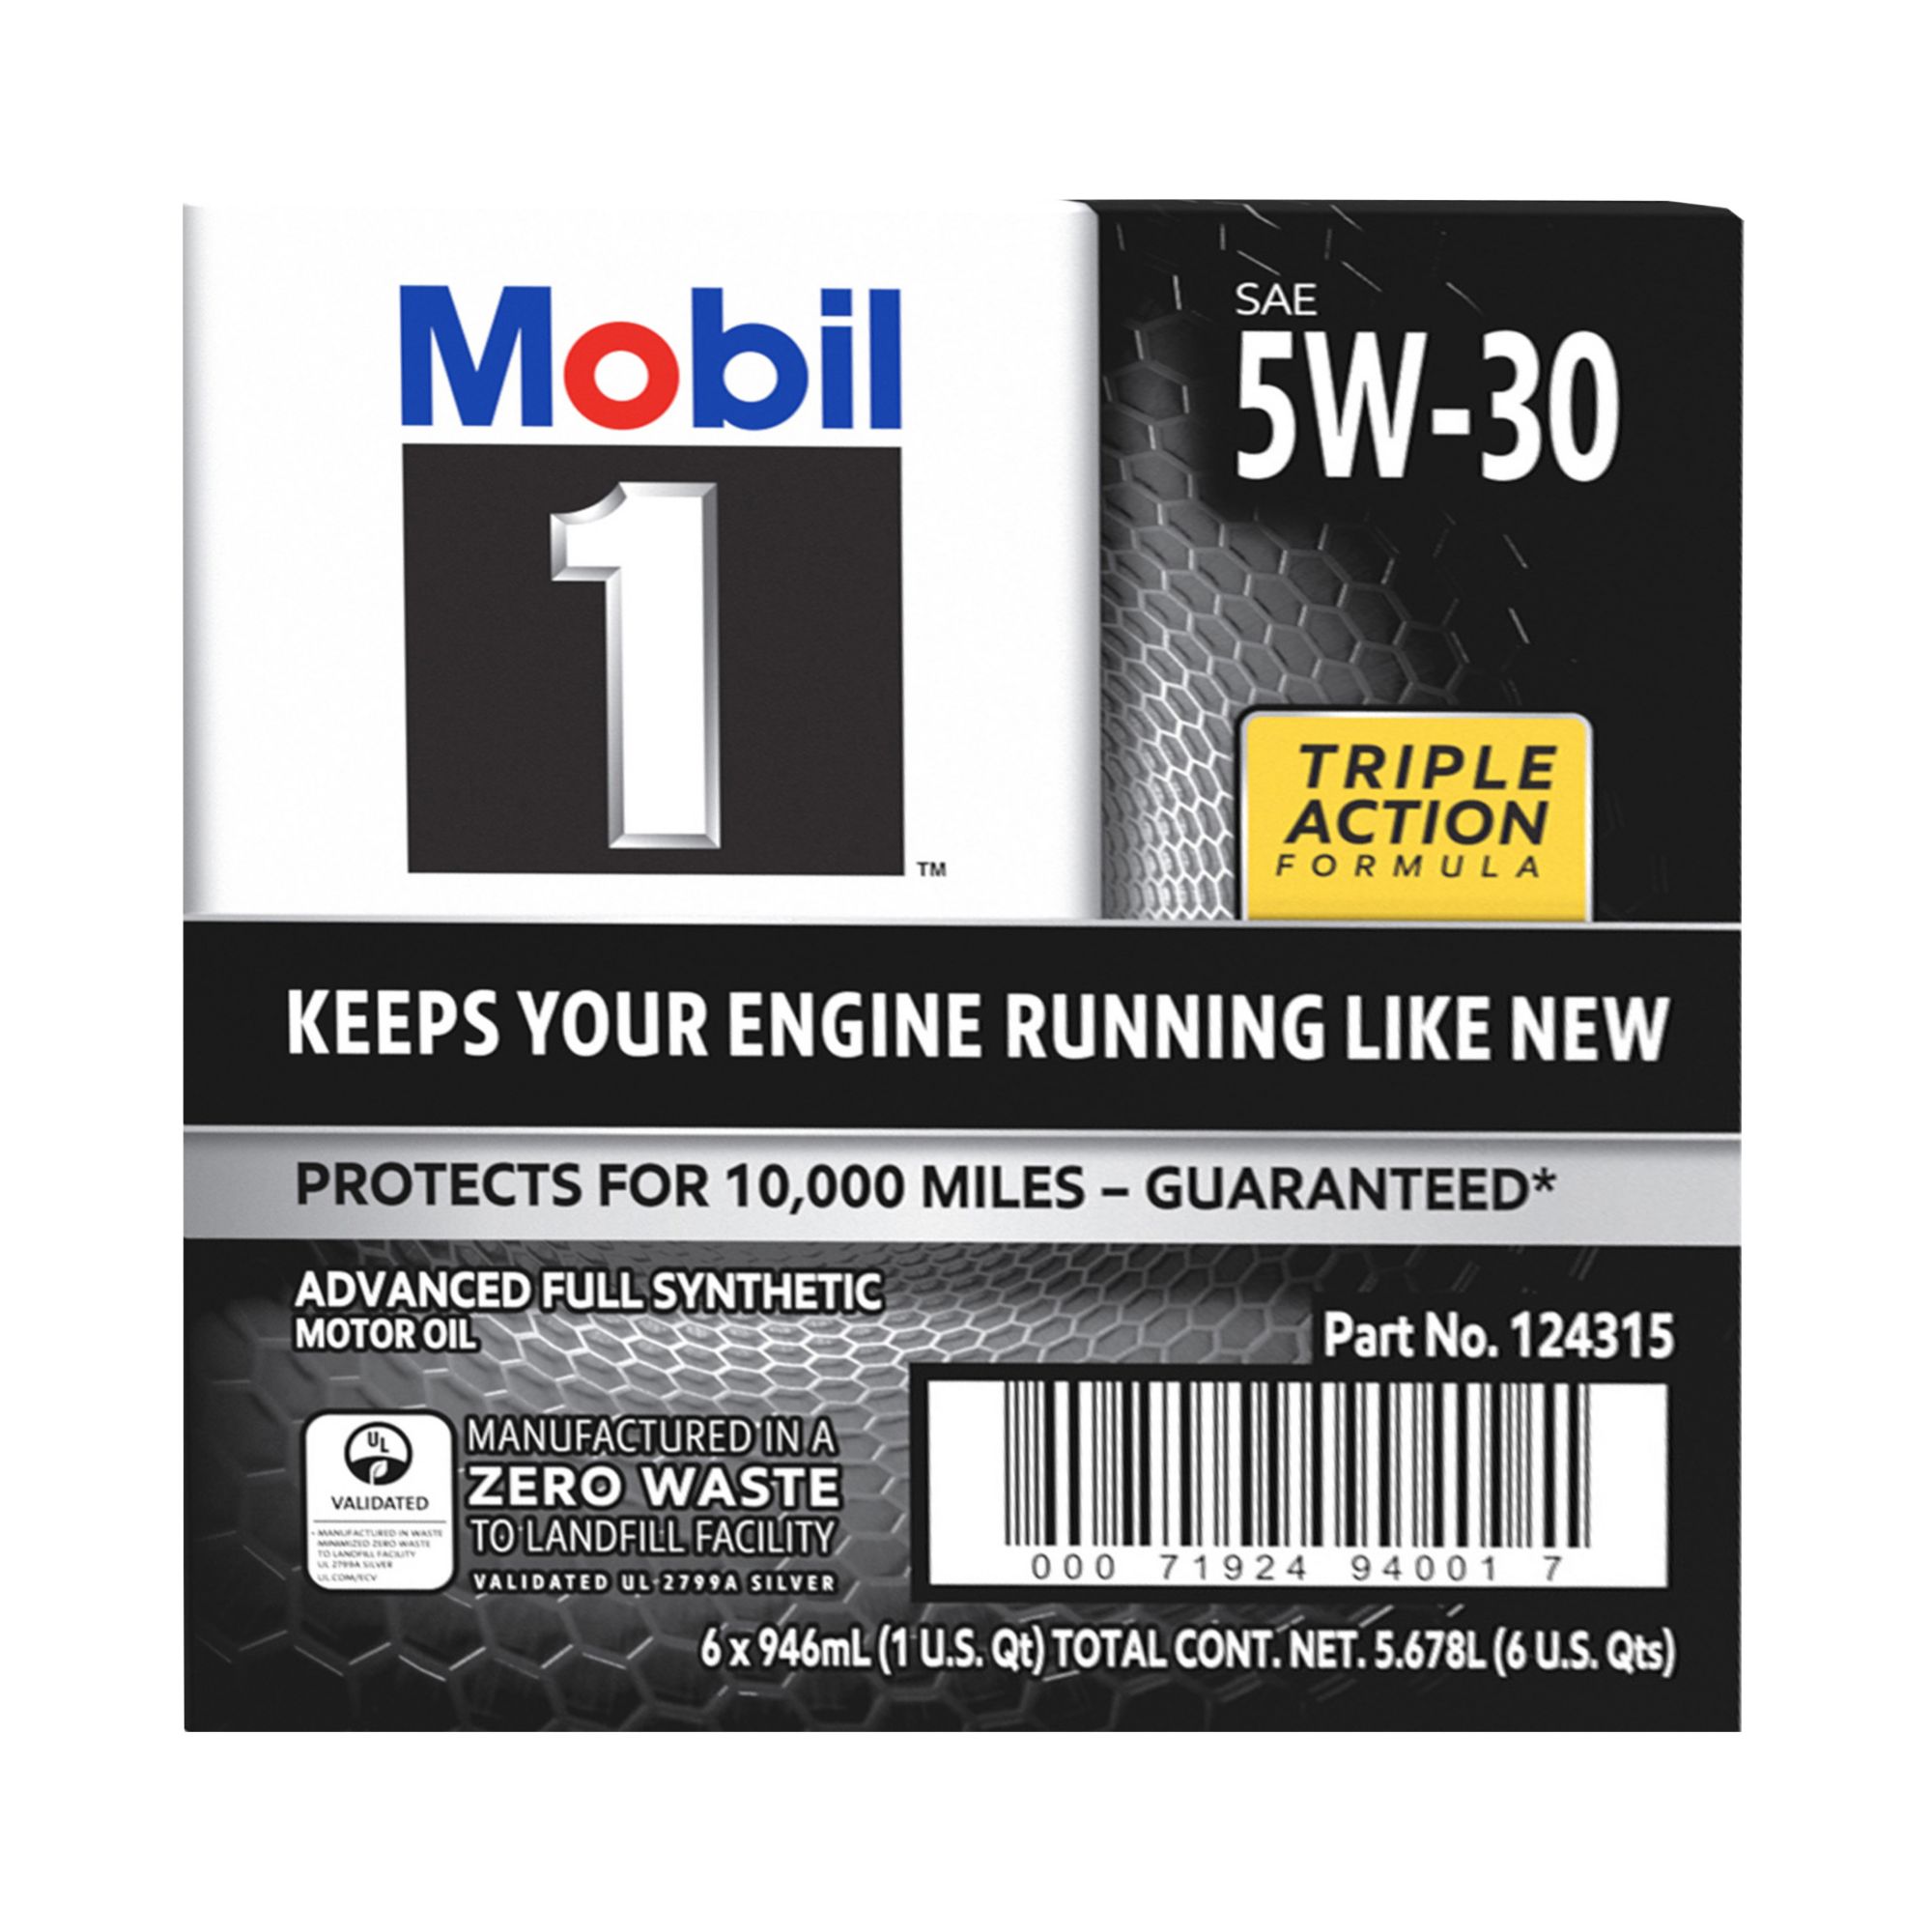 Mobil 1 5W-30 Synthetic Motor Oil - 1 Quart (Pack of 6)